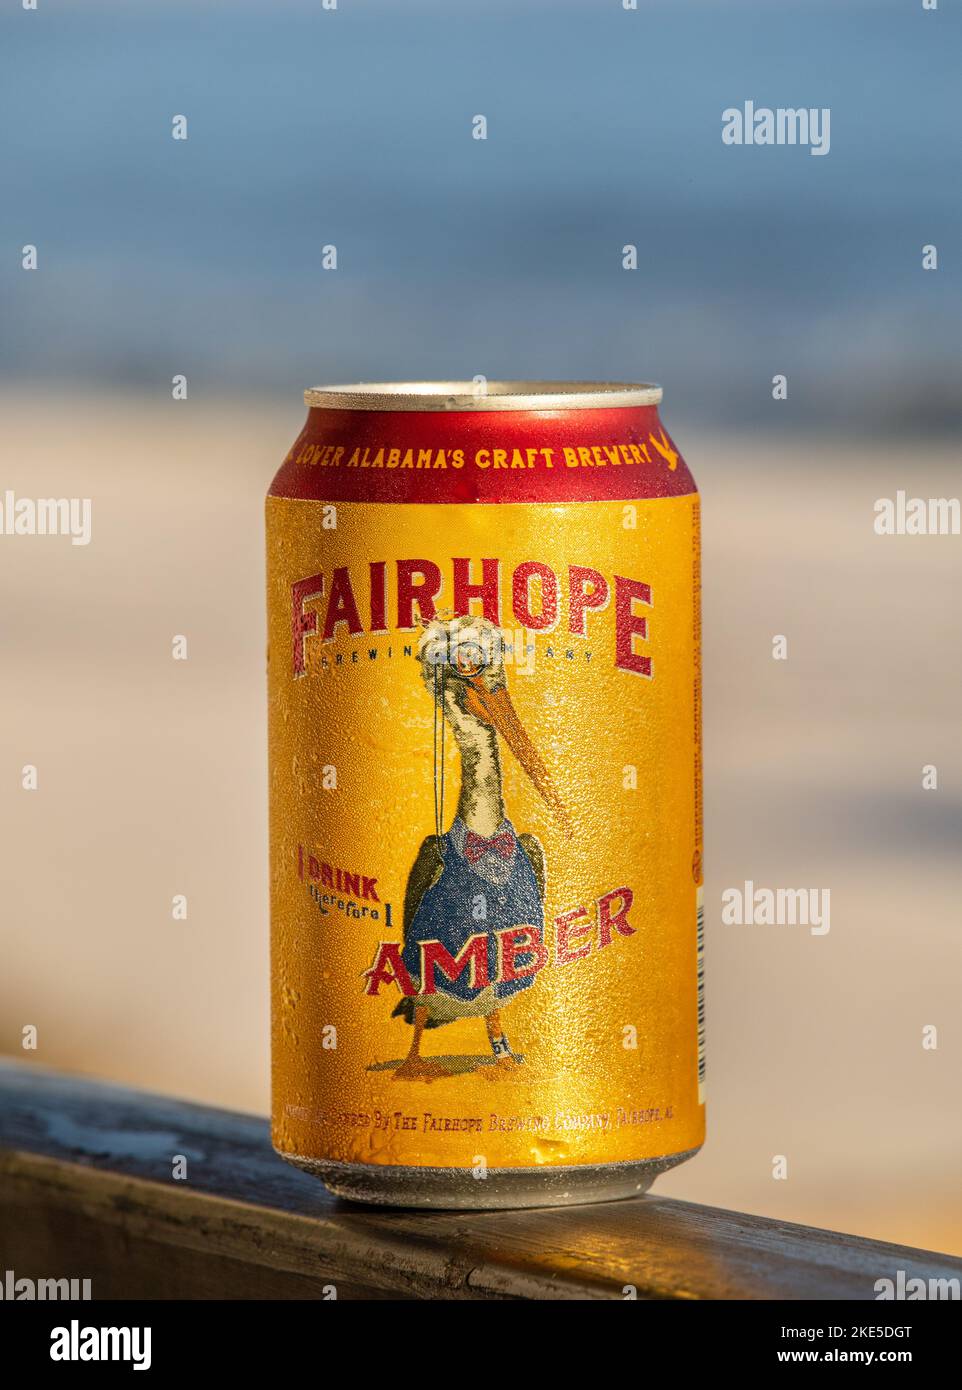 Fairhope Brewing Company Amber Craft Beer Can From Fairhope Alabama USA Alabama's Craft Brewery Stock Photo